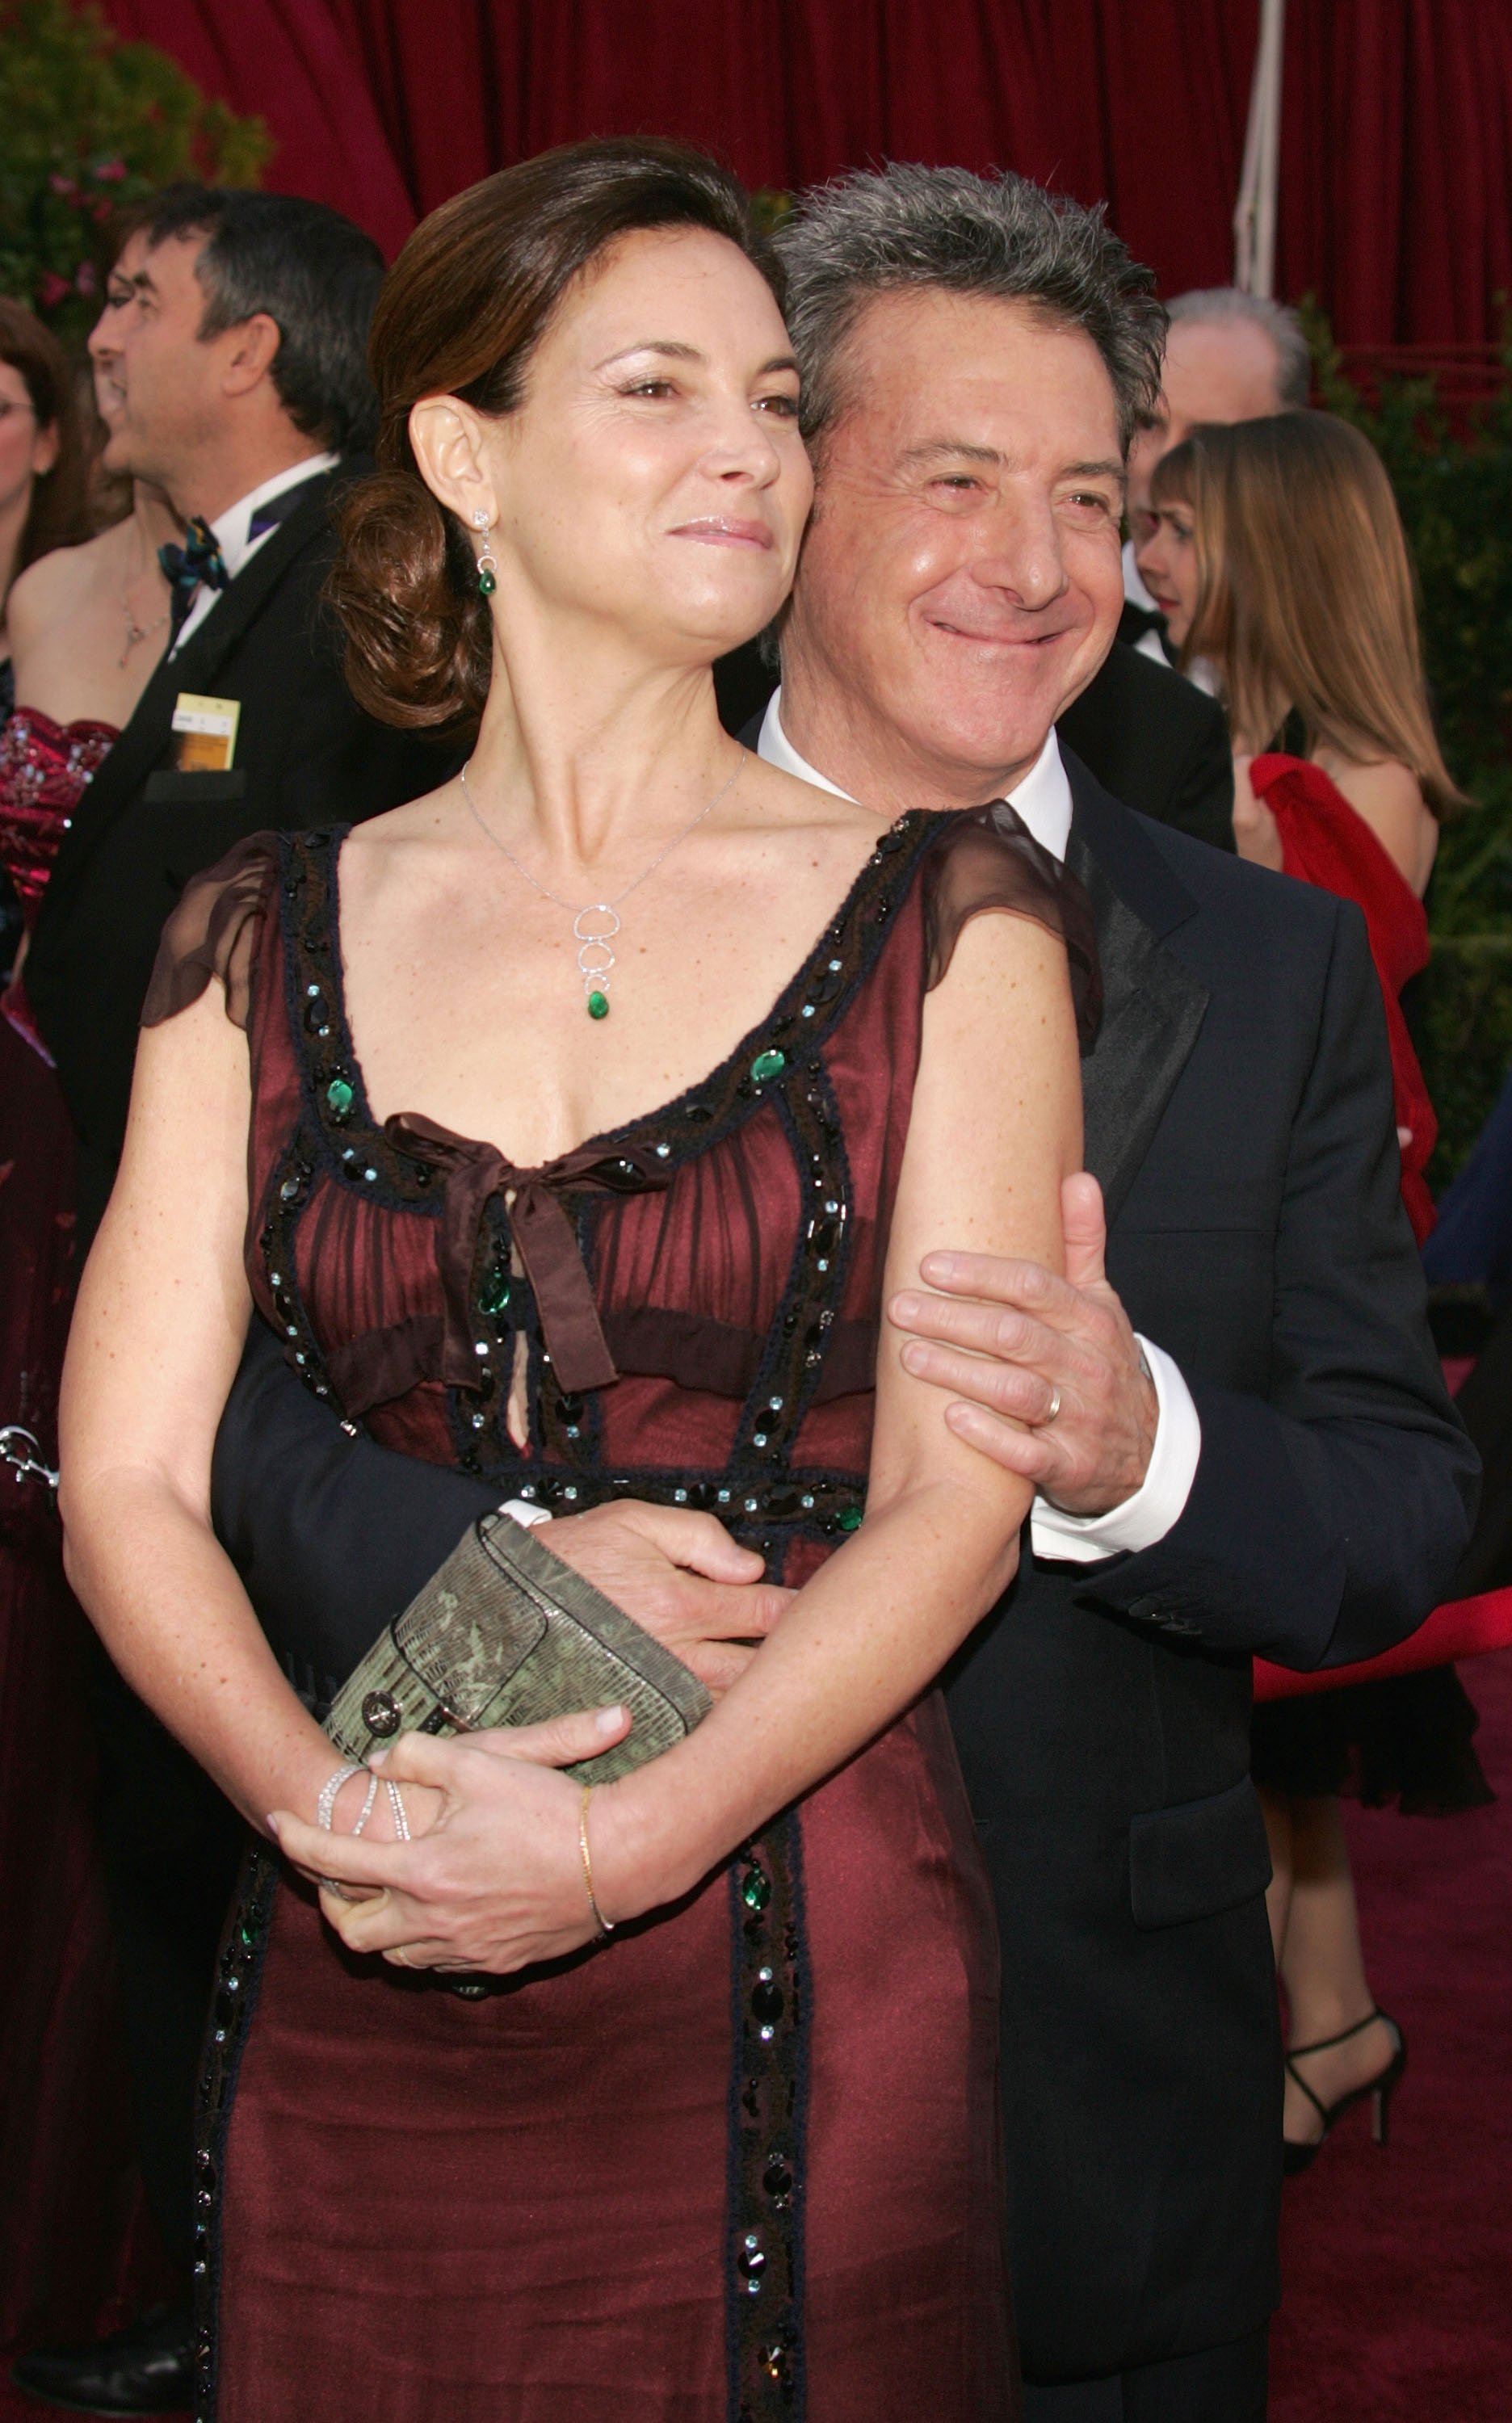 Dustin Hoffman and his wife Lisa Hoffman arrive at the 77th Annual Academy Awards at the Kodak Theater on February 27, 2005 in Hollywood, California | Photo: Getty Images